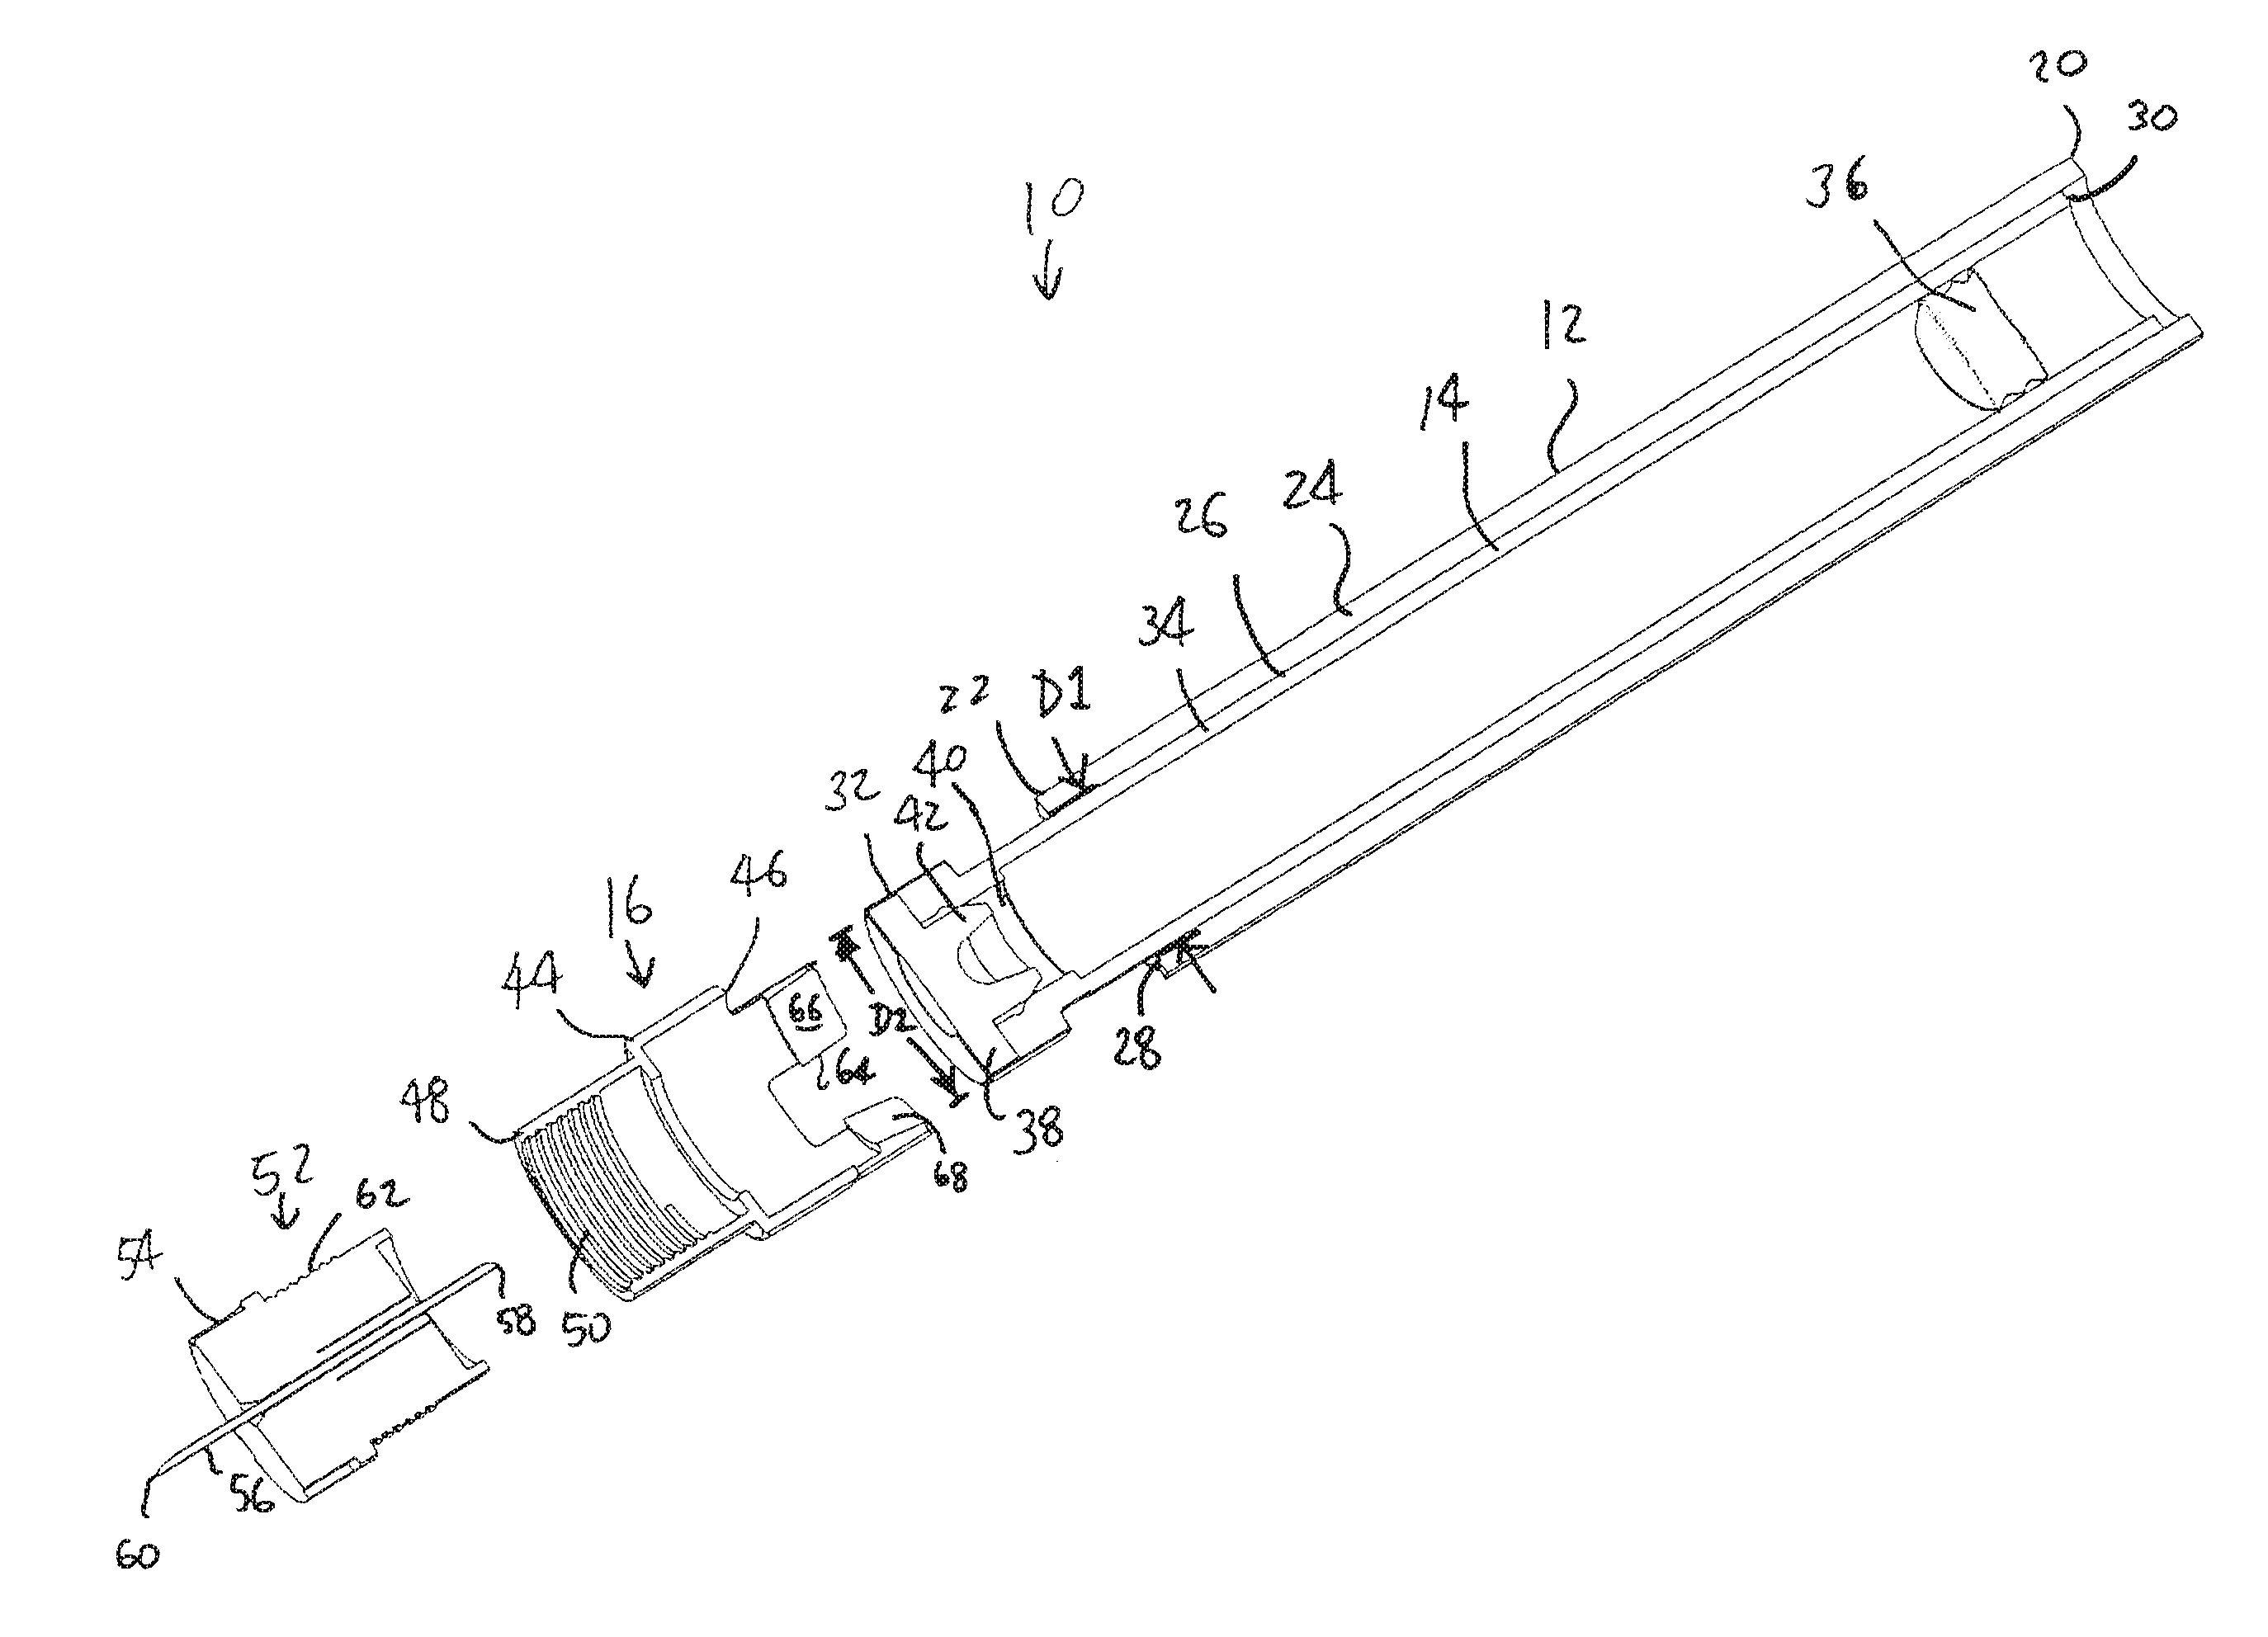 Drug delivery device having cartridge with enlarged distal end